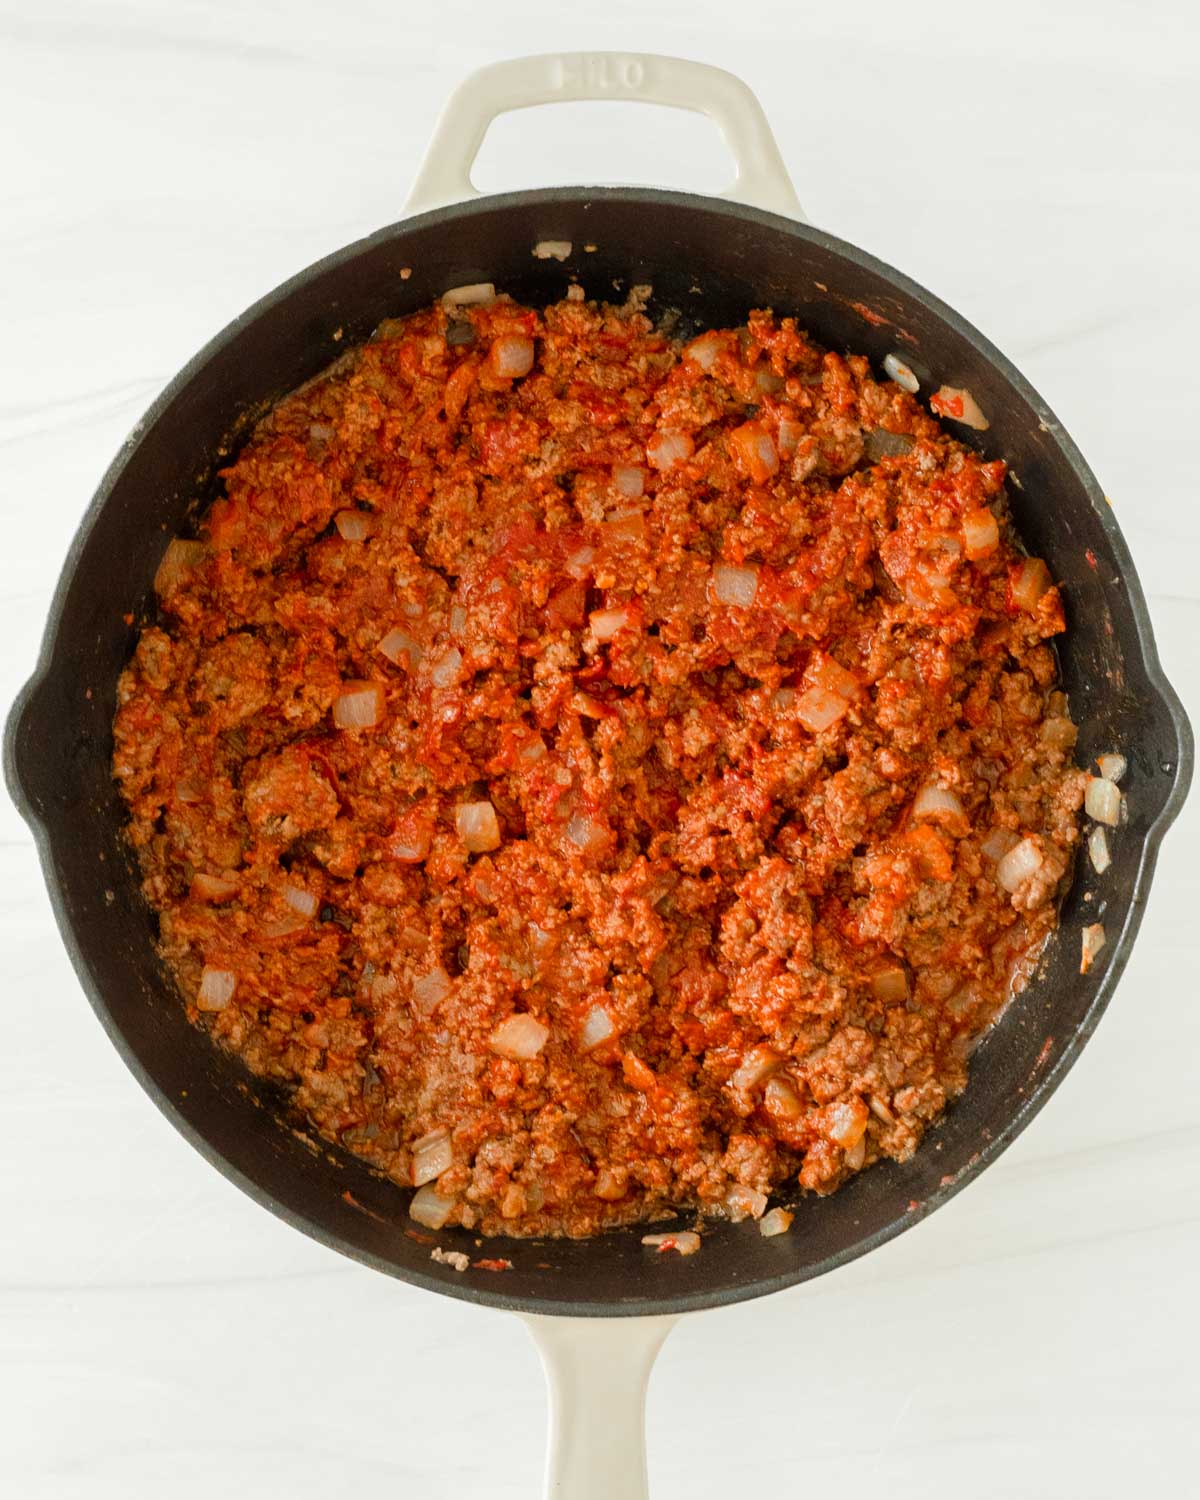 Step 4. Stir the tomato paste into the beef